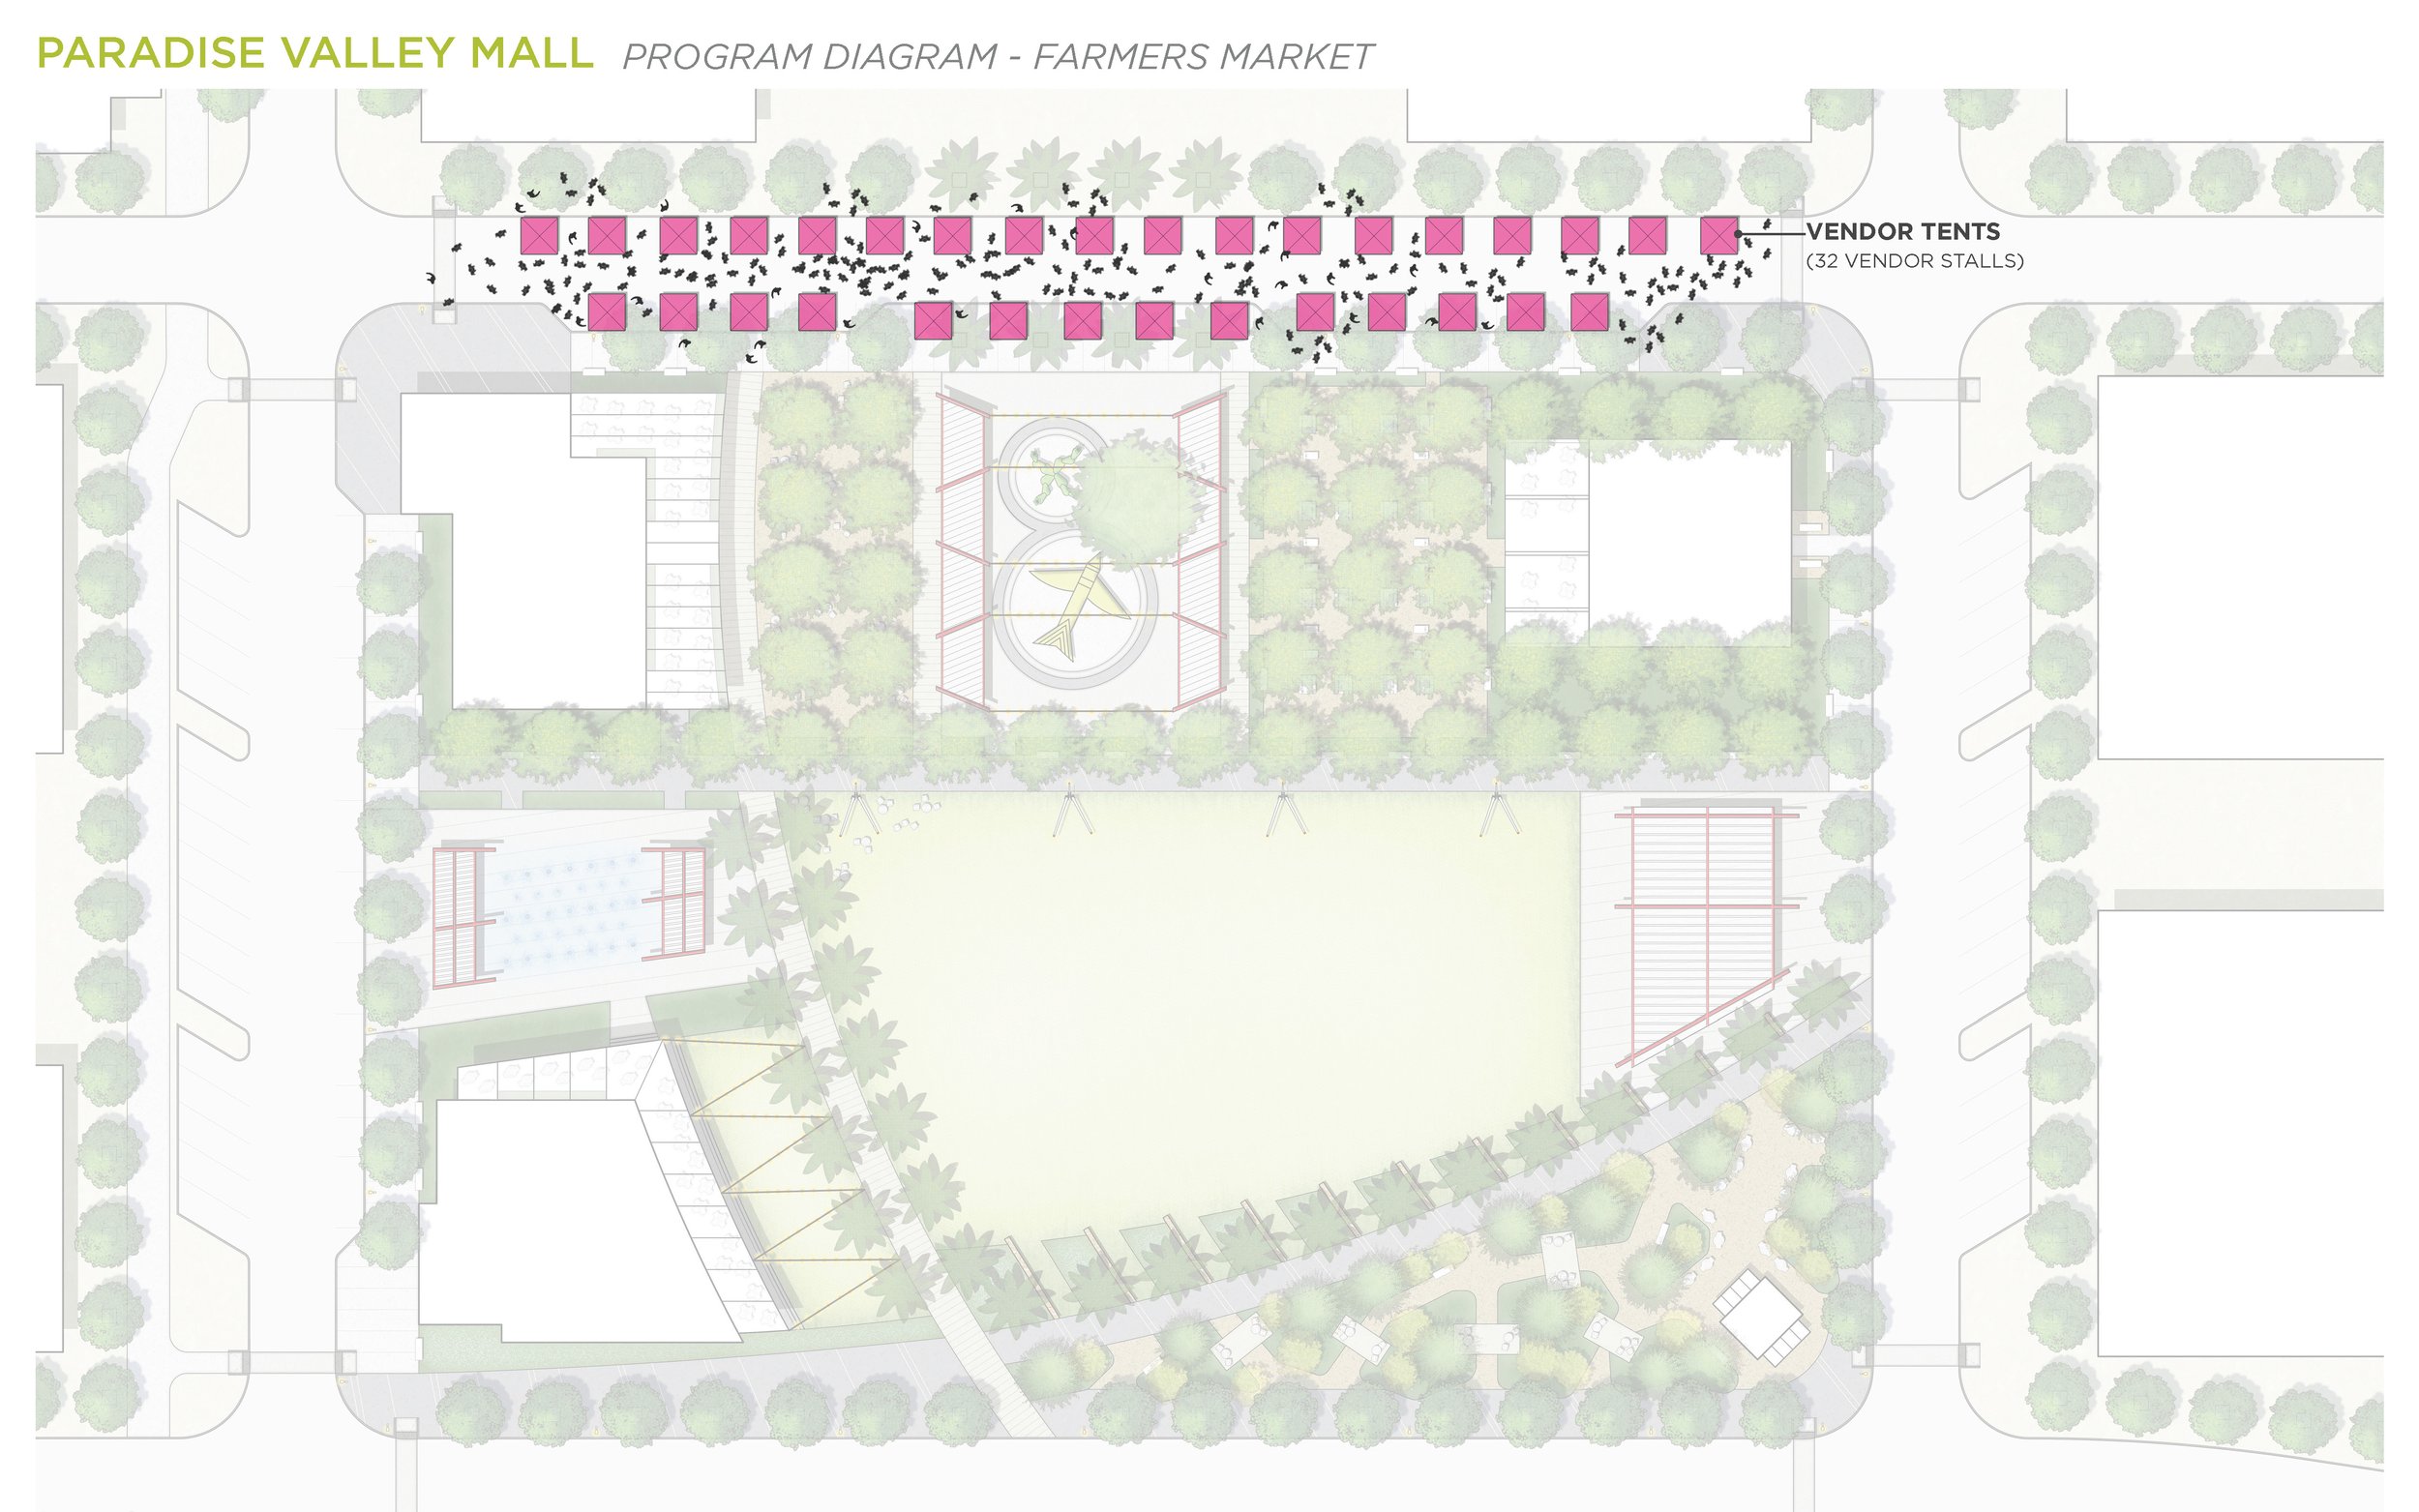  (Chip) In this example, the client wanted to use Kierland Commons as a precedent for the design of Paradise Valley Mall. We addressed the unique challenge of recreating the "feel" of Kierland Commons through designing attributes specific to Paradise